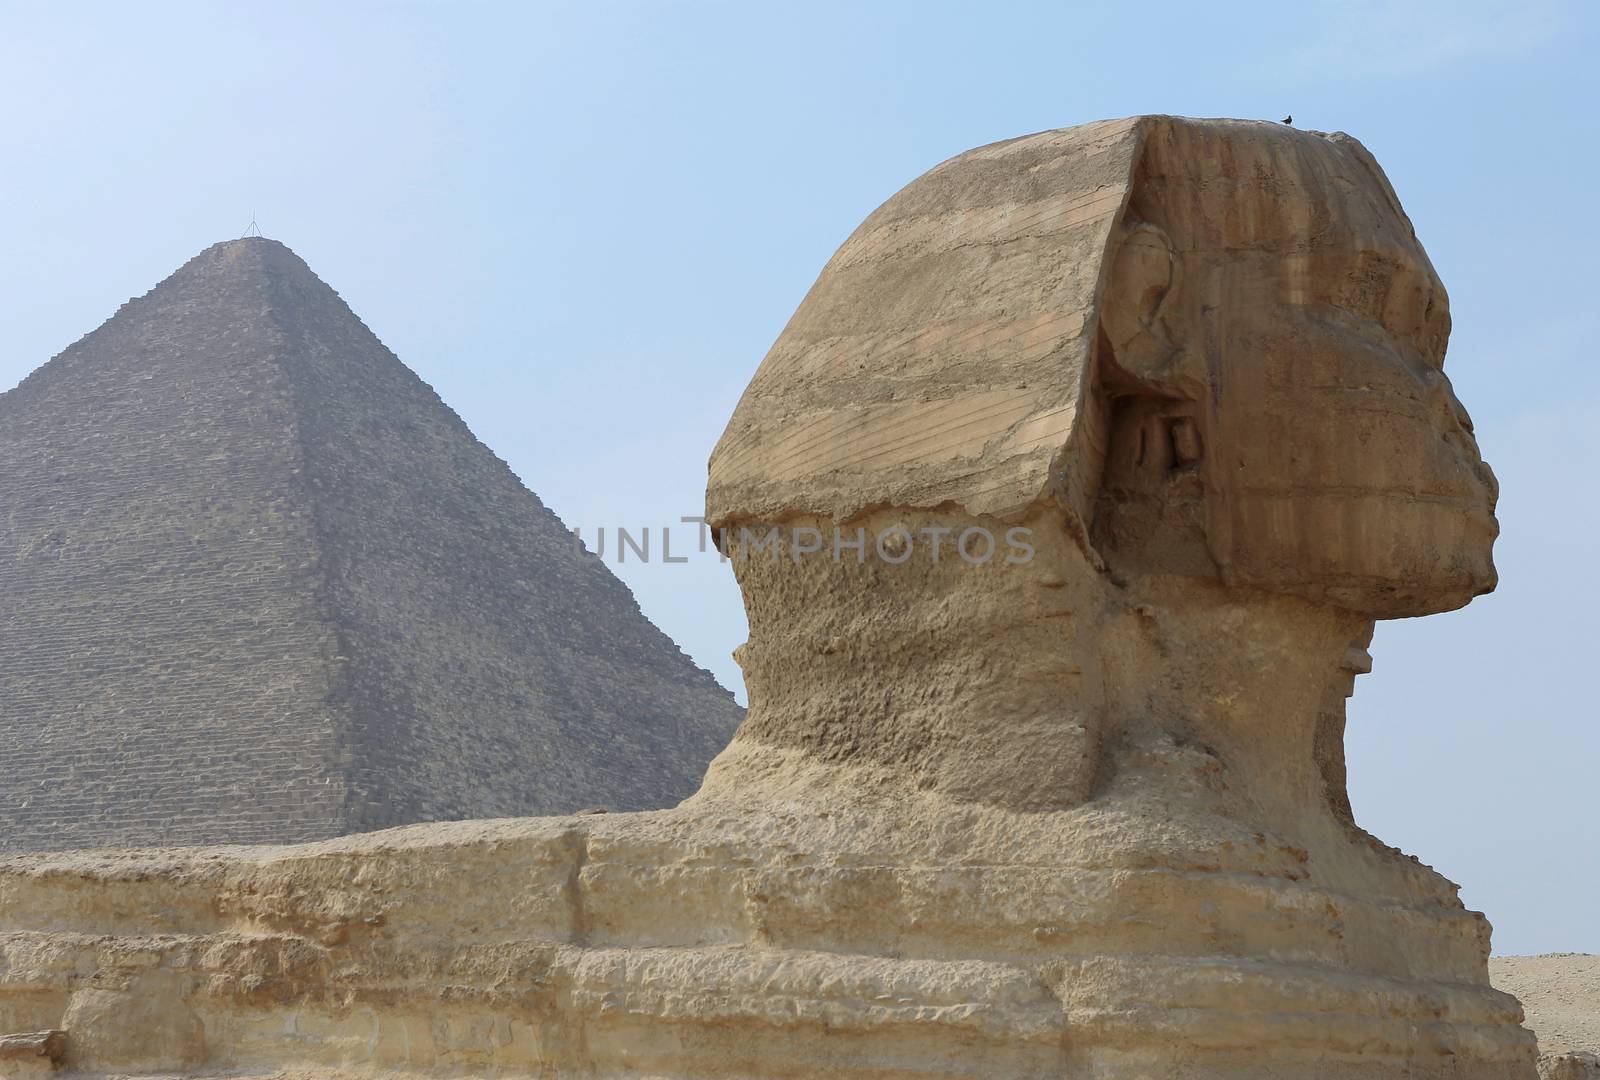 Pyramids In Desert Of Egypt And Sphinx In Giza by scullery